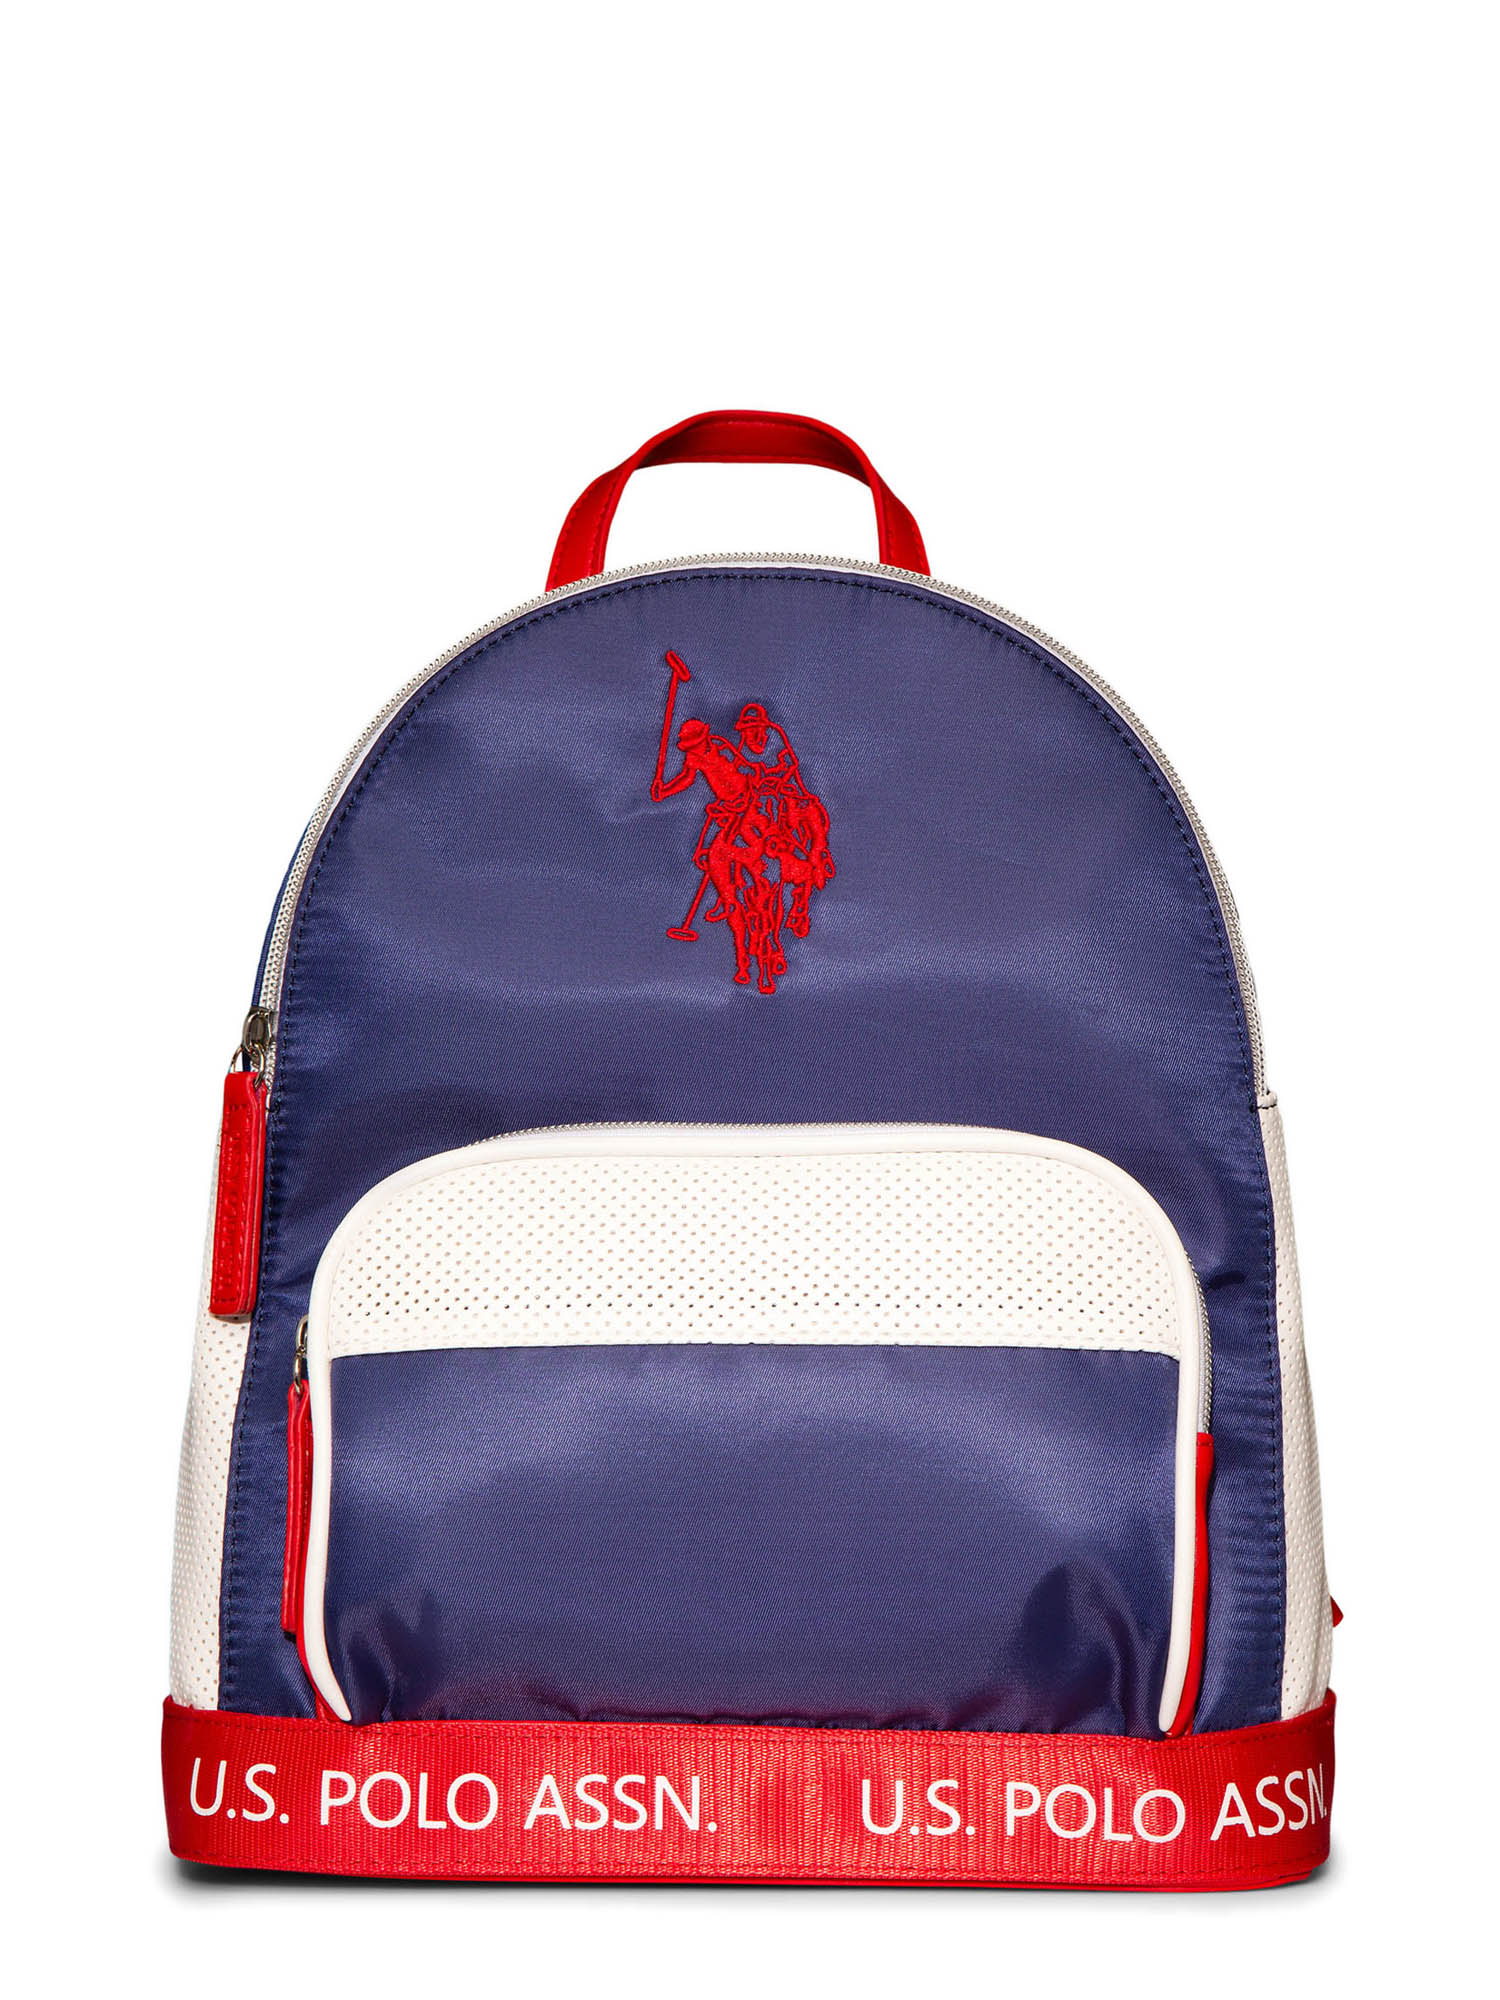 U.S. Polo Assn. Women's Sport Navy Red Backpack - image 1 of 2